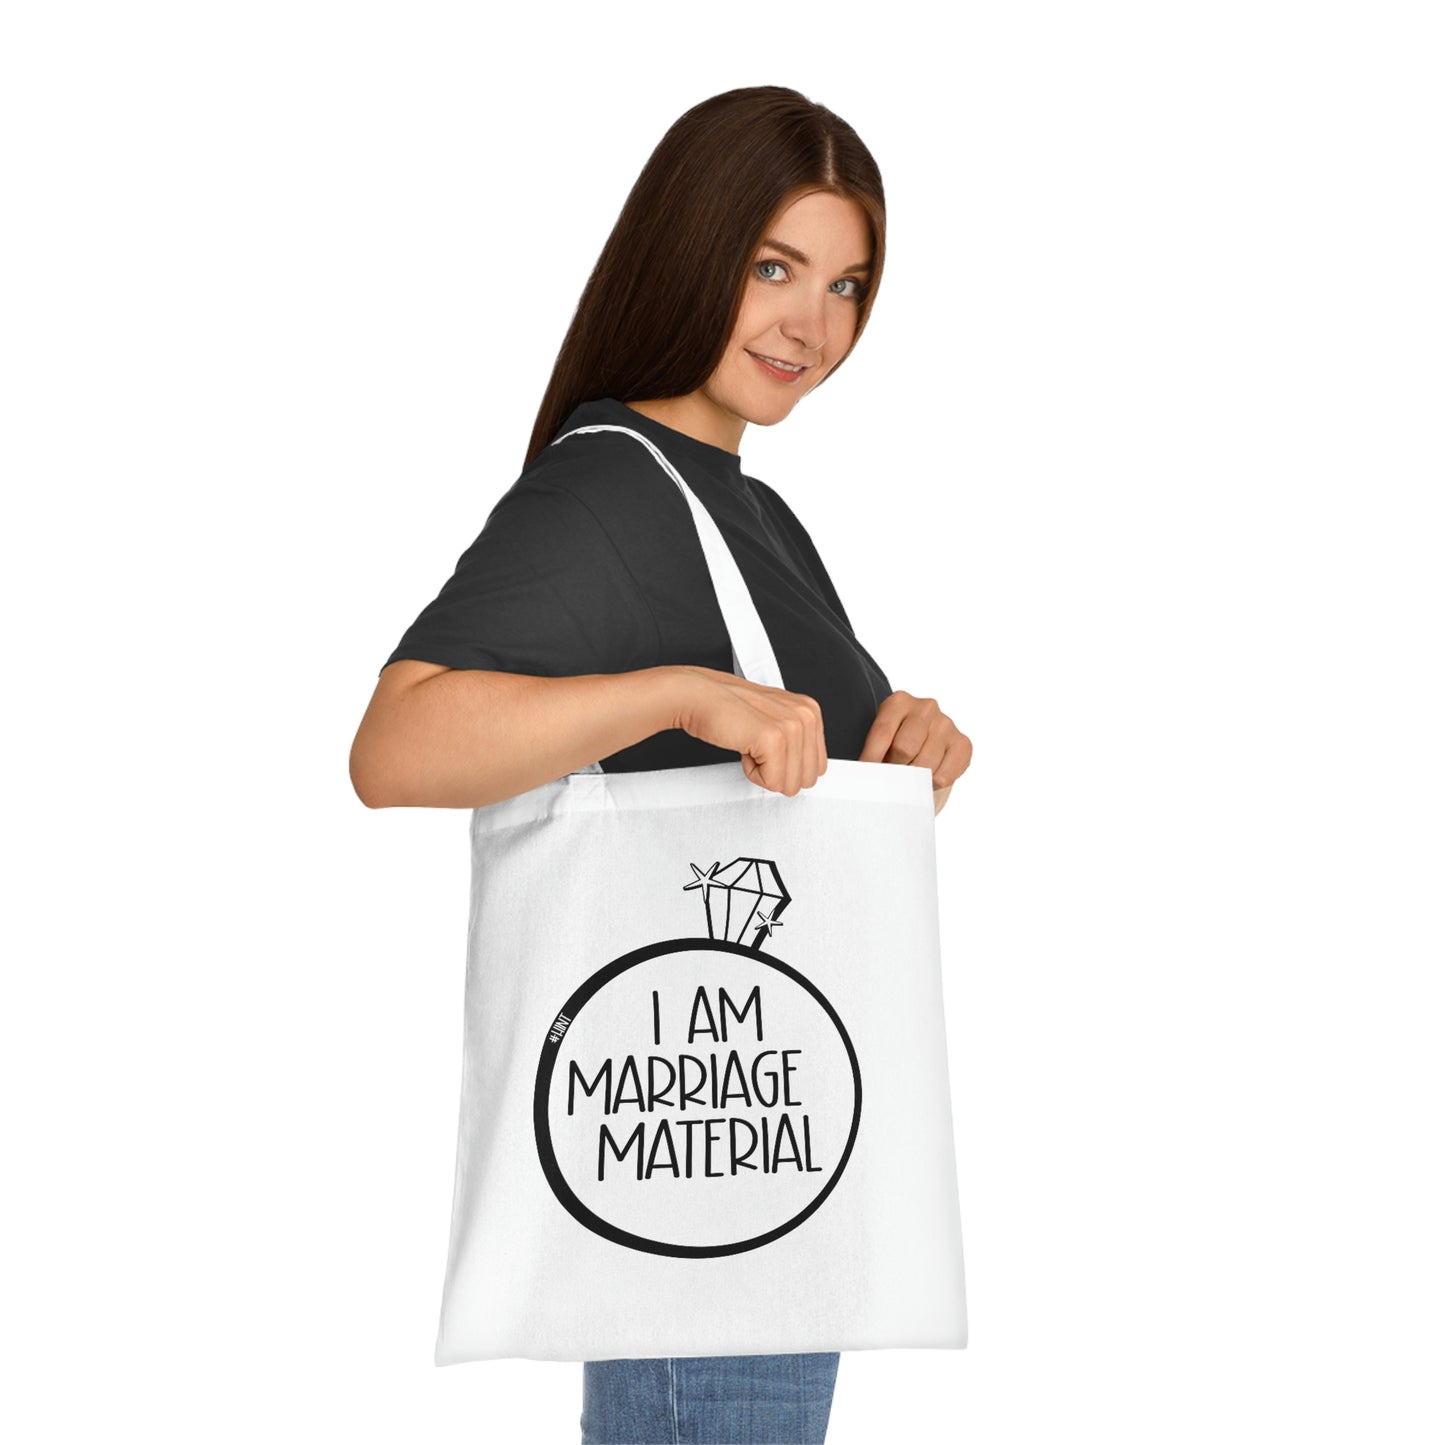 Weirdo | Waiting for your partner to ask you to marry you? Take out this bag when you are going shopping together to give them the hint that you are ready!